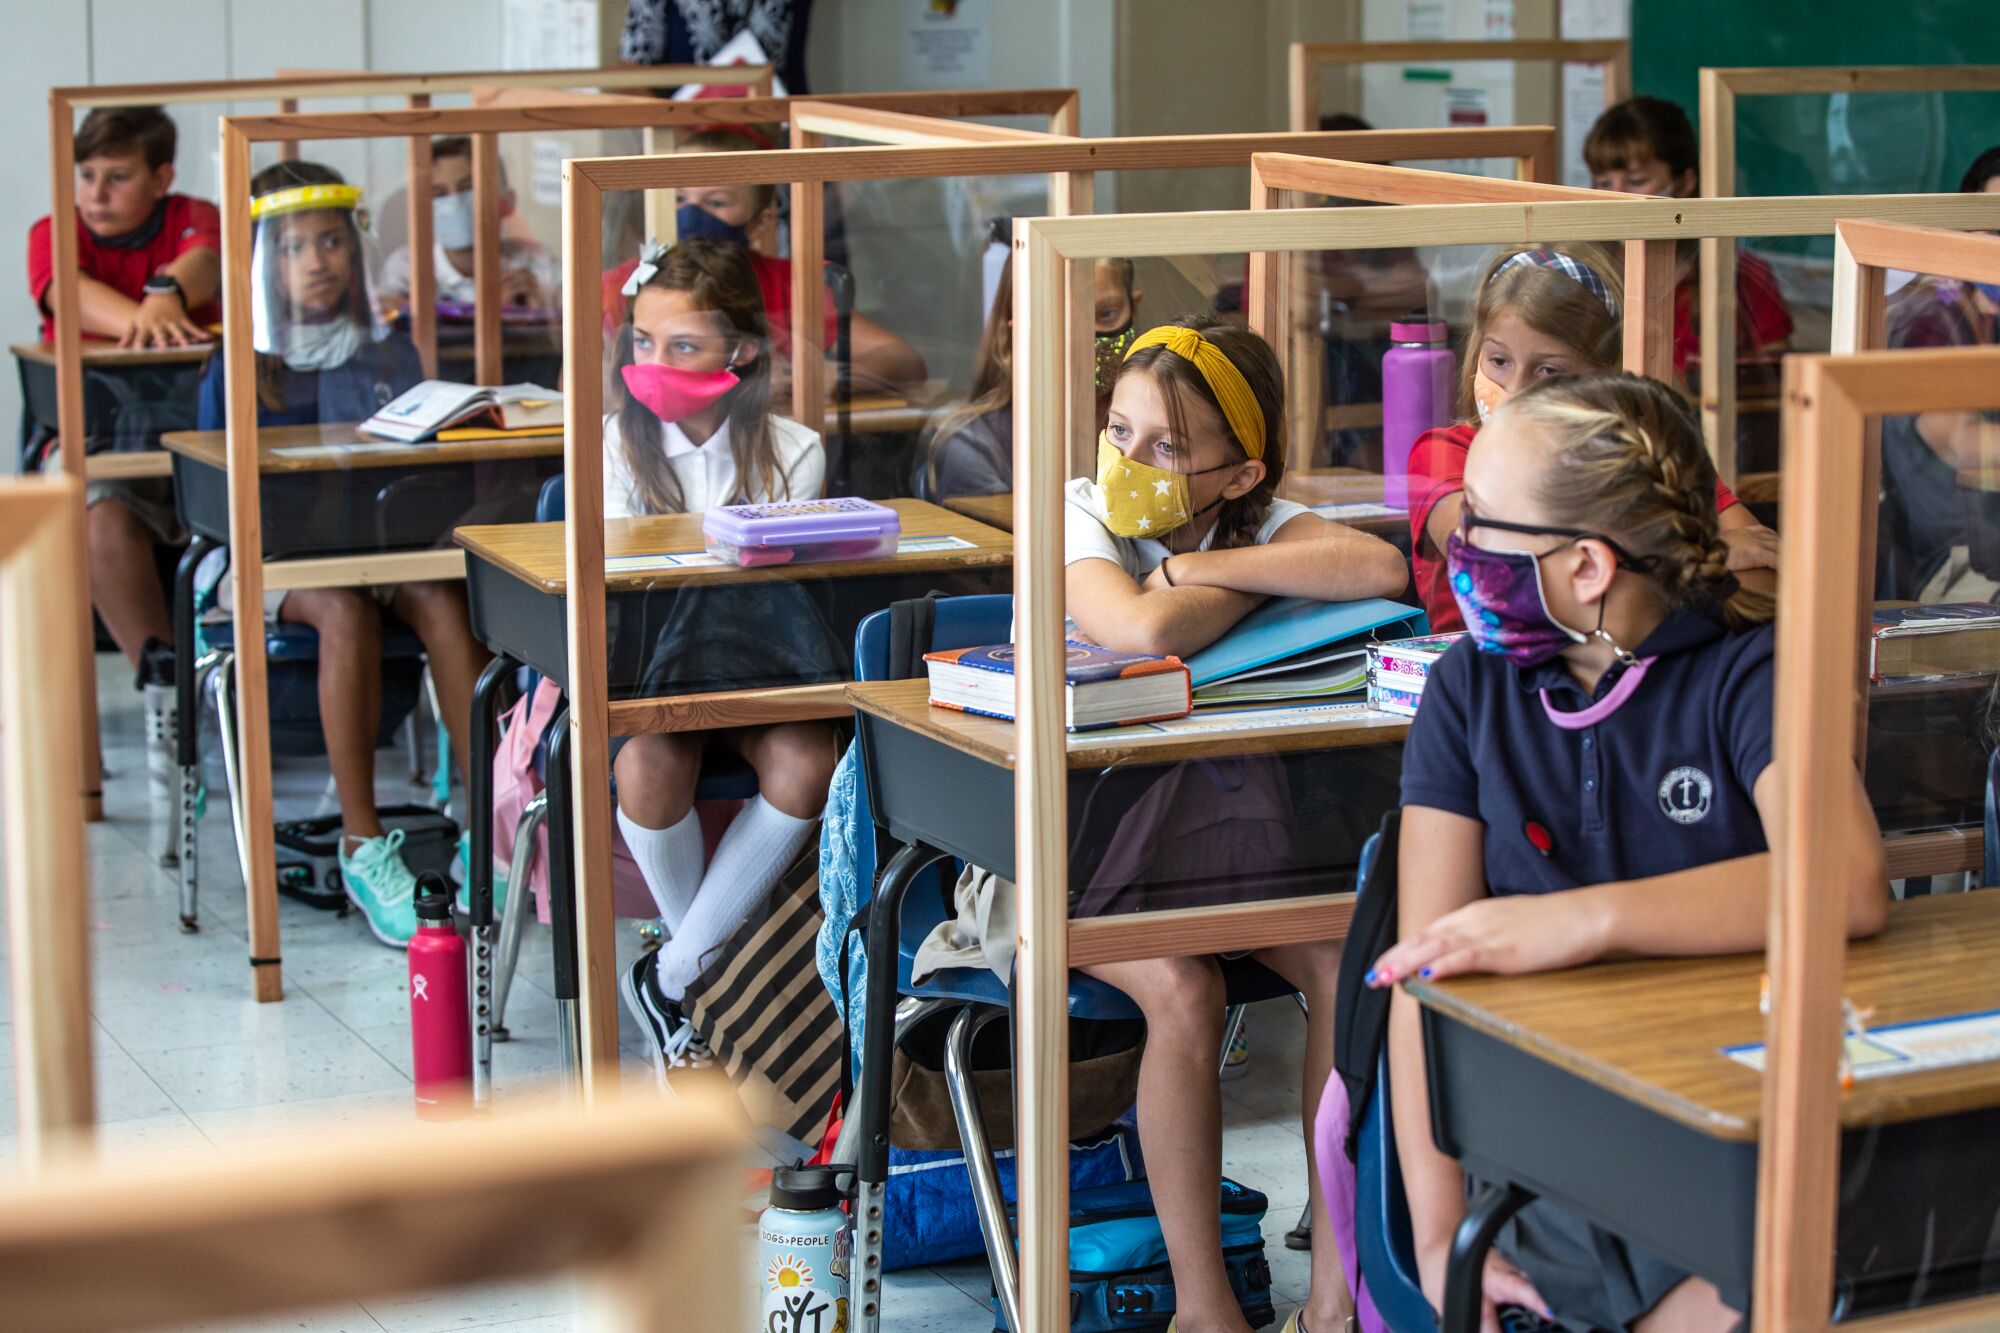 Plexiglass dividers separate students desks at Christian Unified East elementary school in El Cajon on Monday.